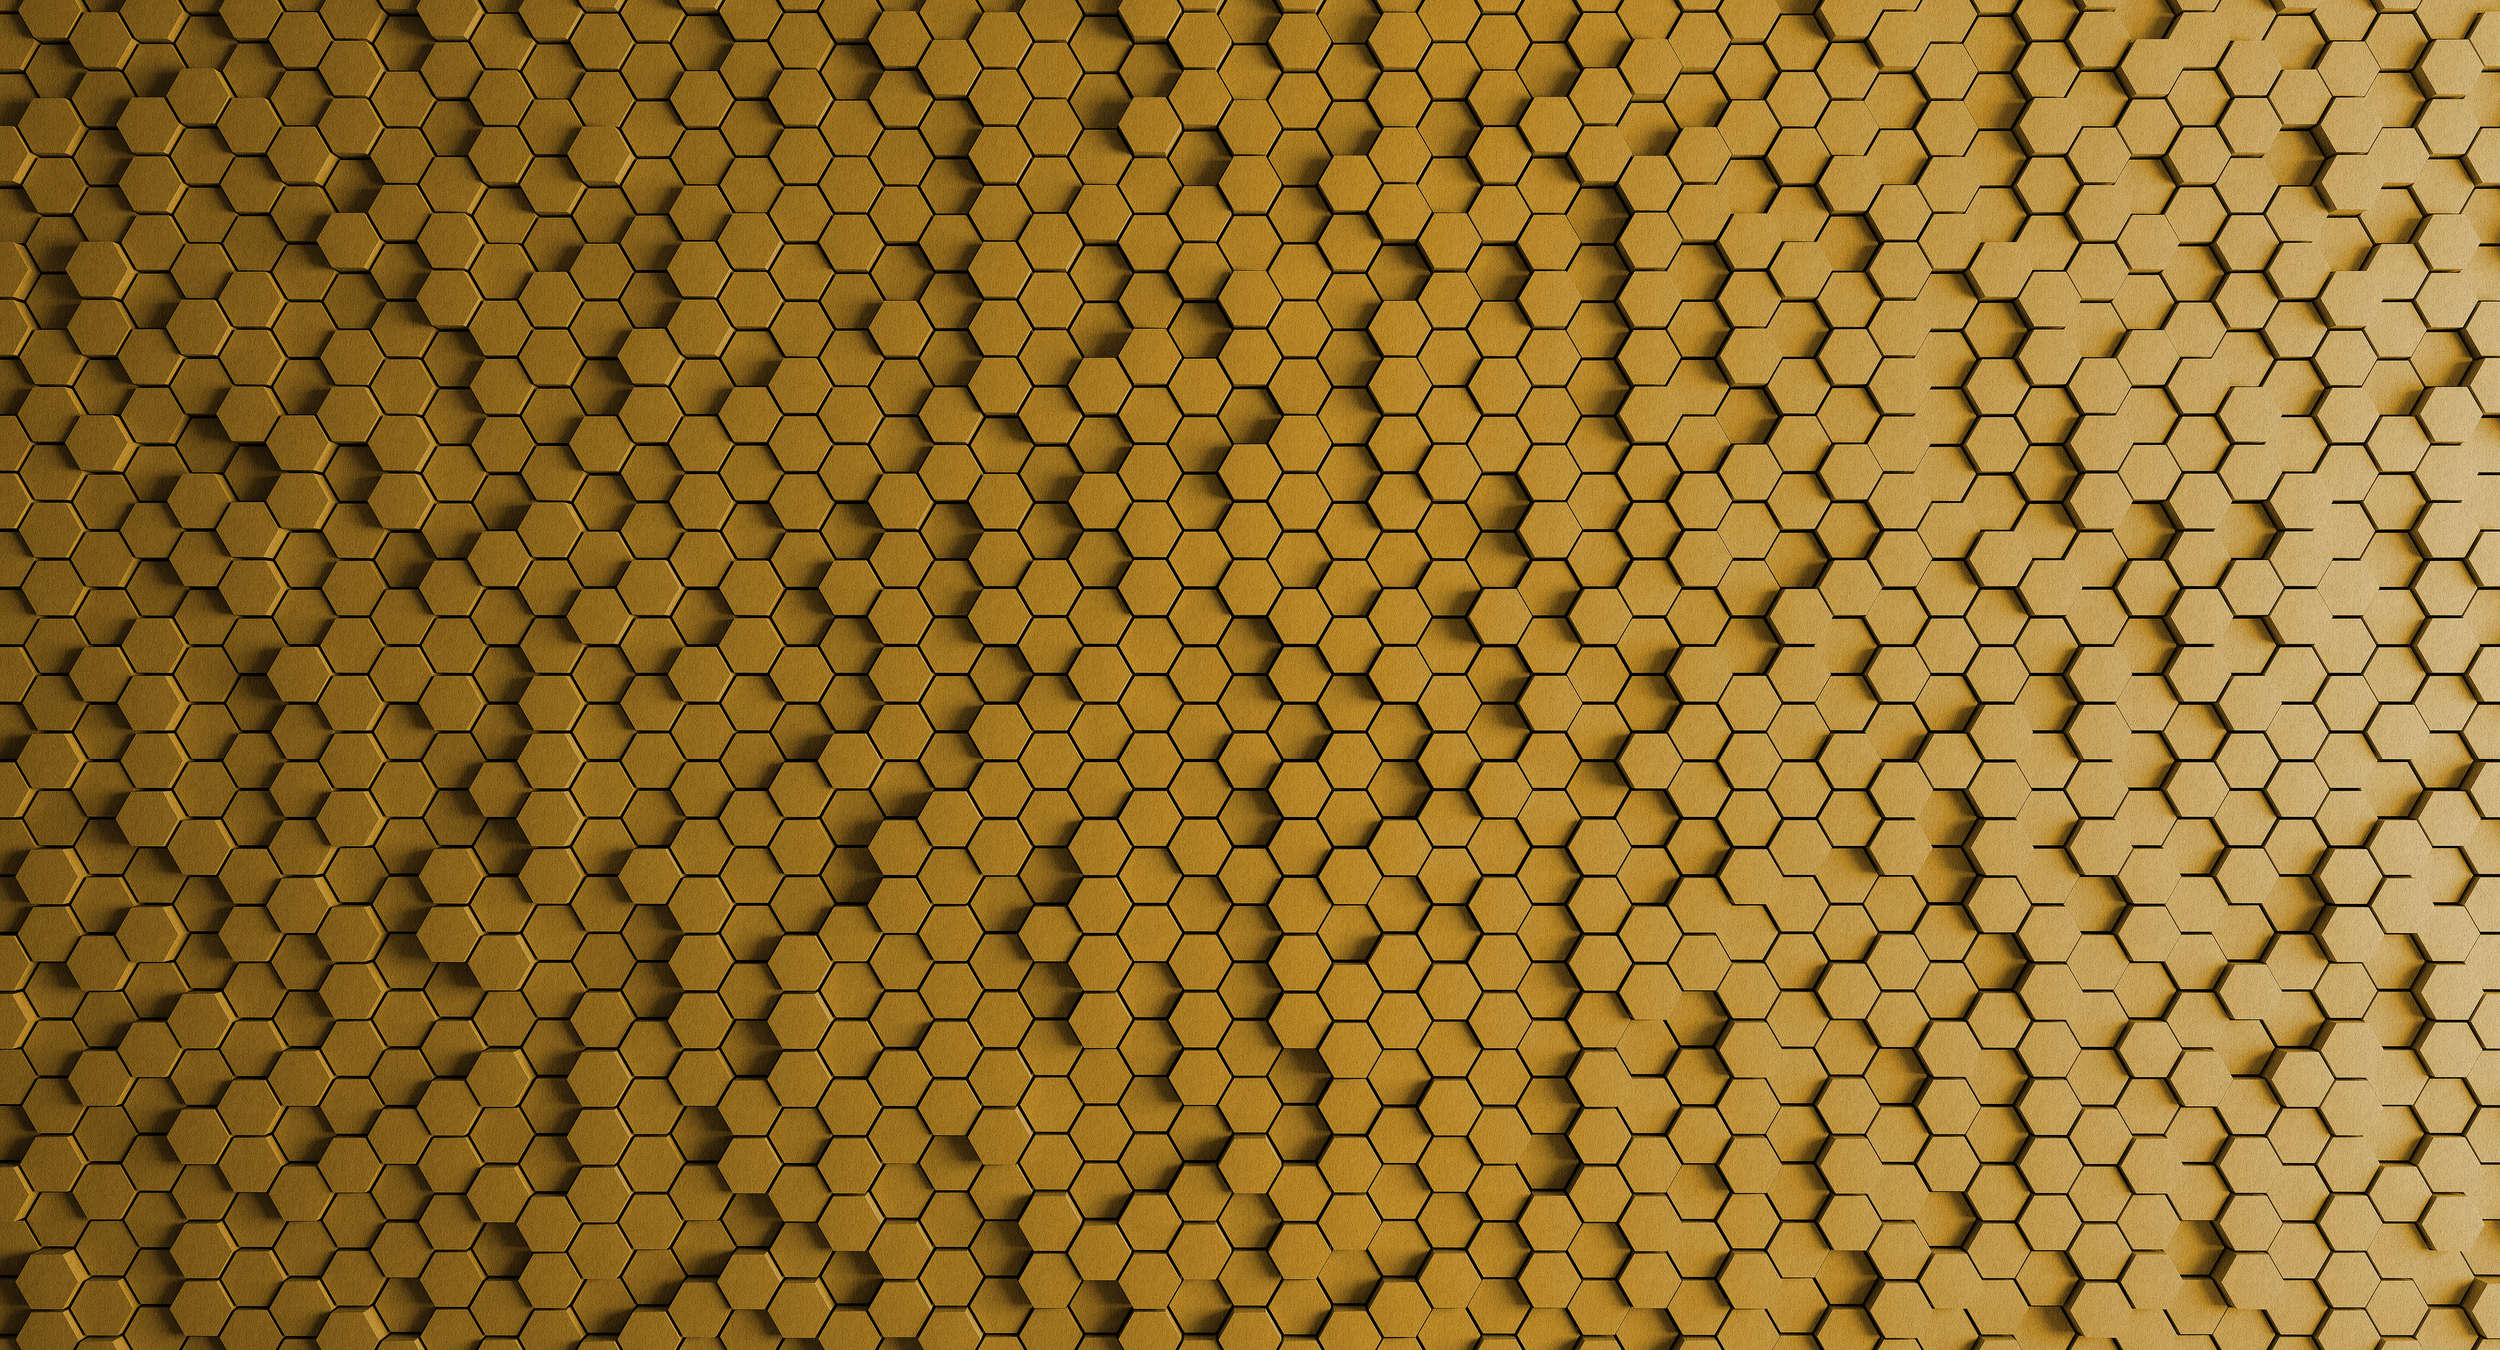             Honeycomb 1 - 3D wallpaper with yellow honeycomb design in felt structure - Yellow, Black | Structure non-woven
        